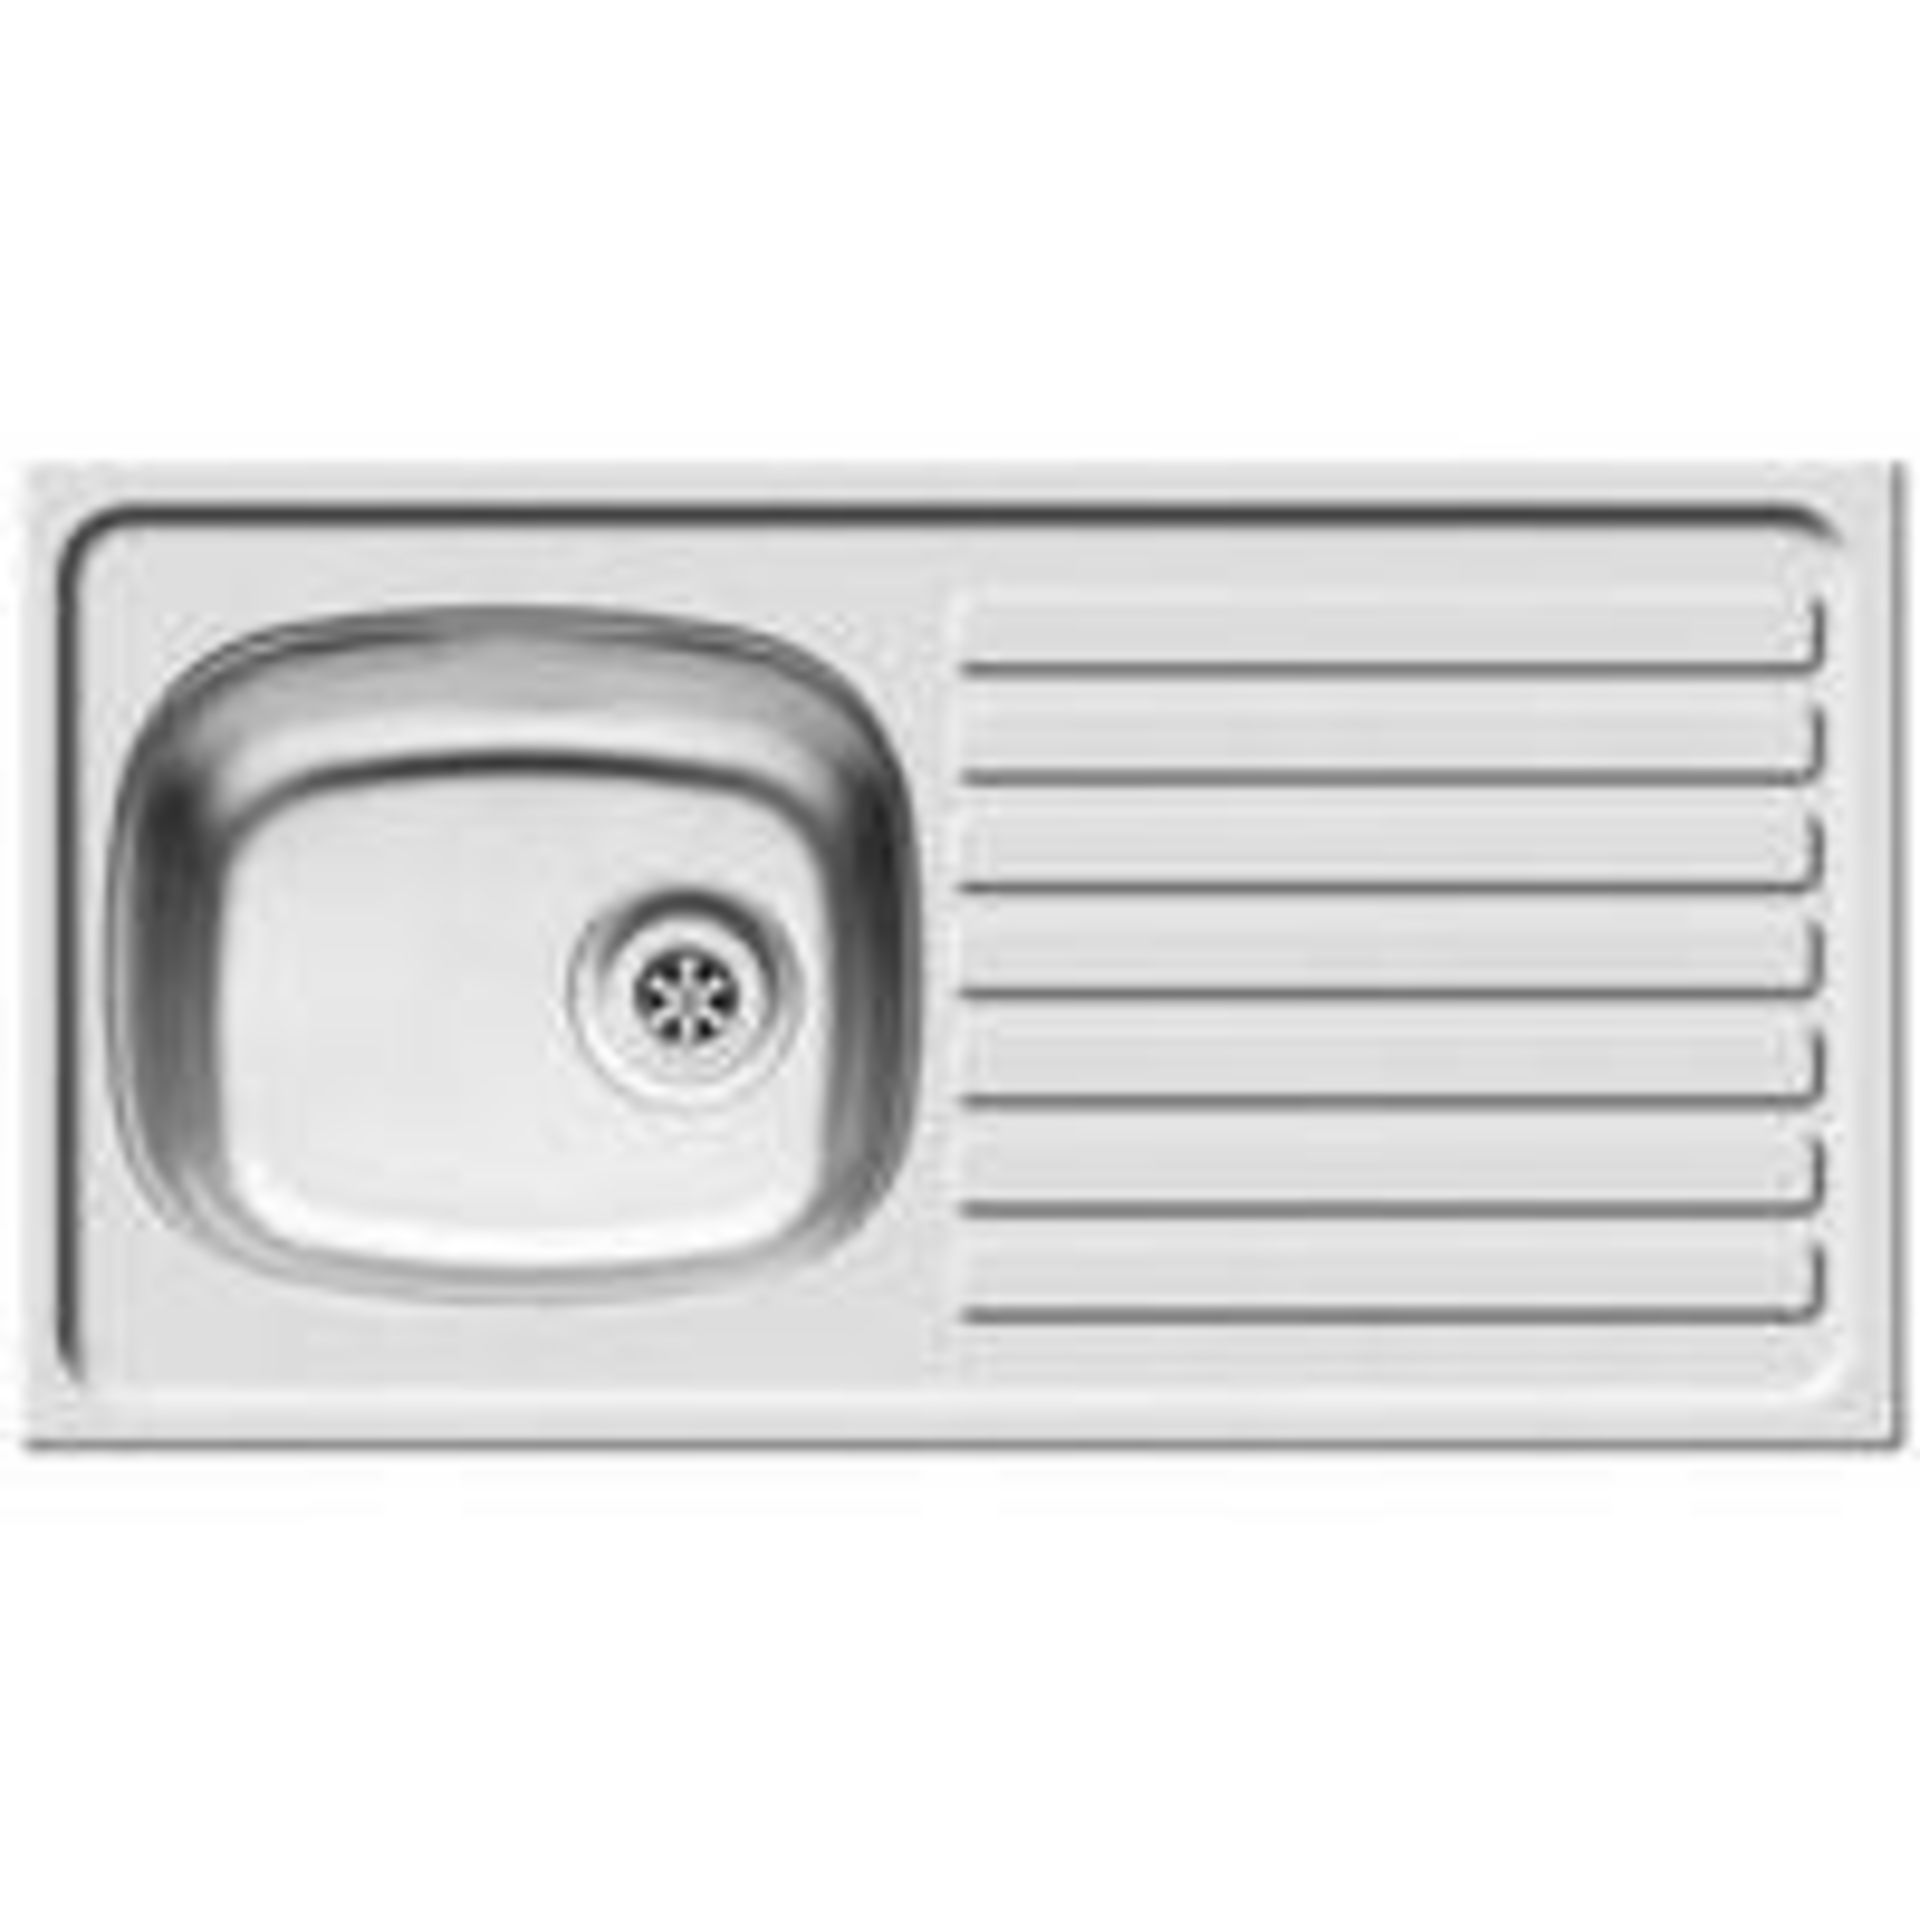 V Brand New Pyramis Kitchen Sink Stainless Steel 1 Bowl 940 x 160mm RRP £39.99 - Image 2 of 3